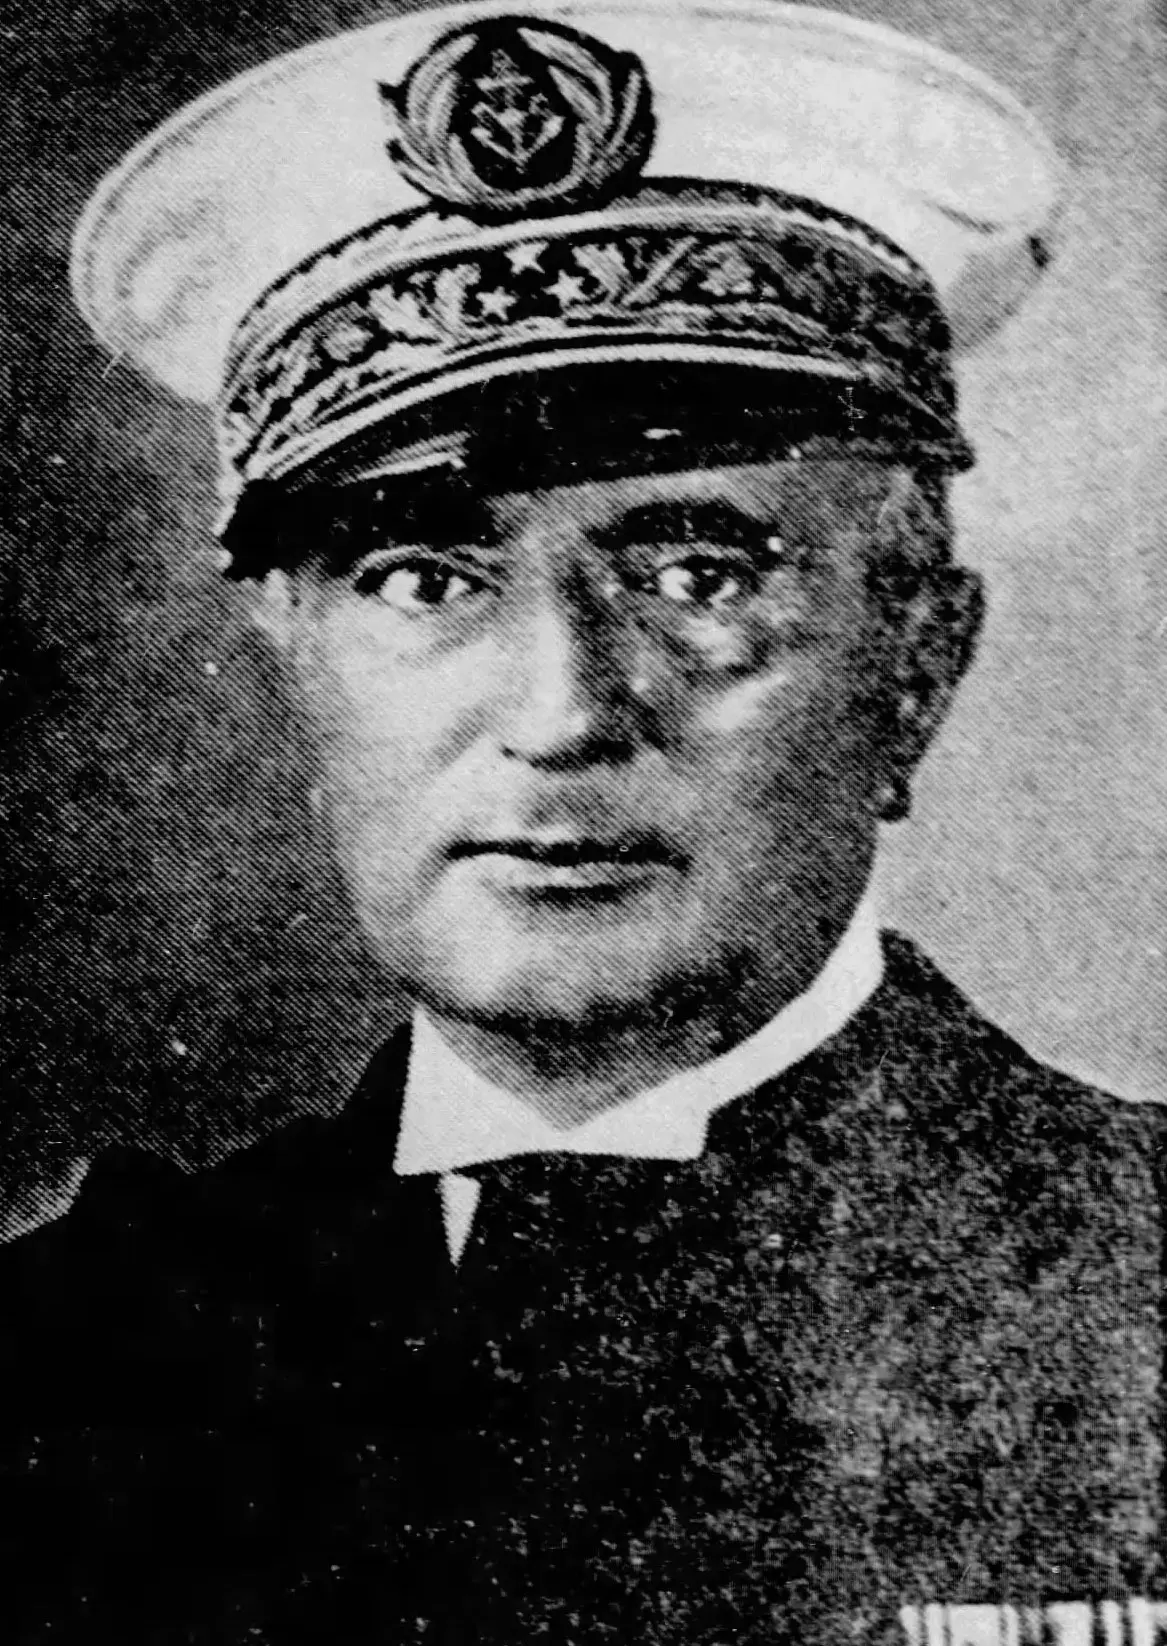 A black and white portrait of the French admiral Jean Francois Darlan in his dress uniform.